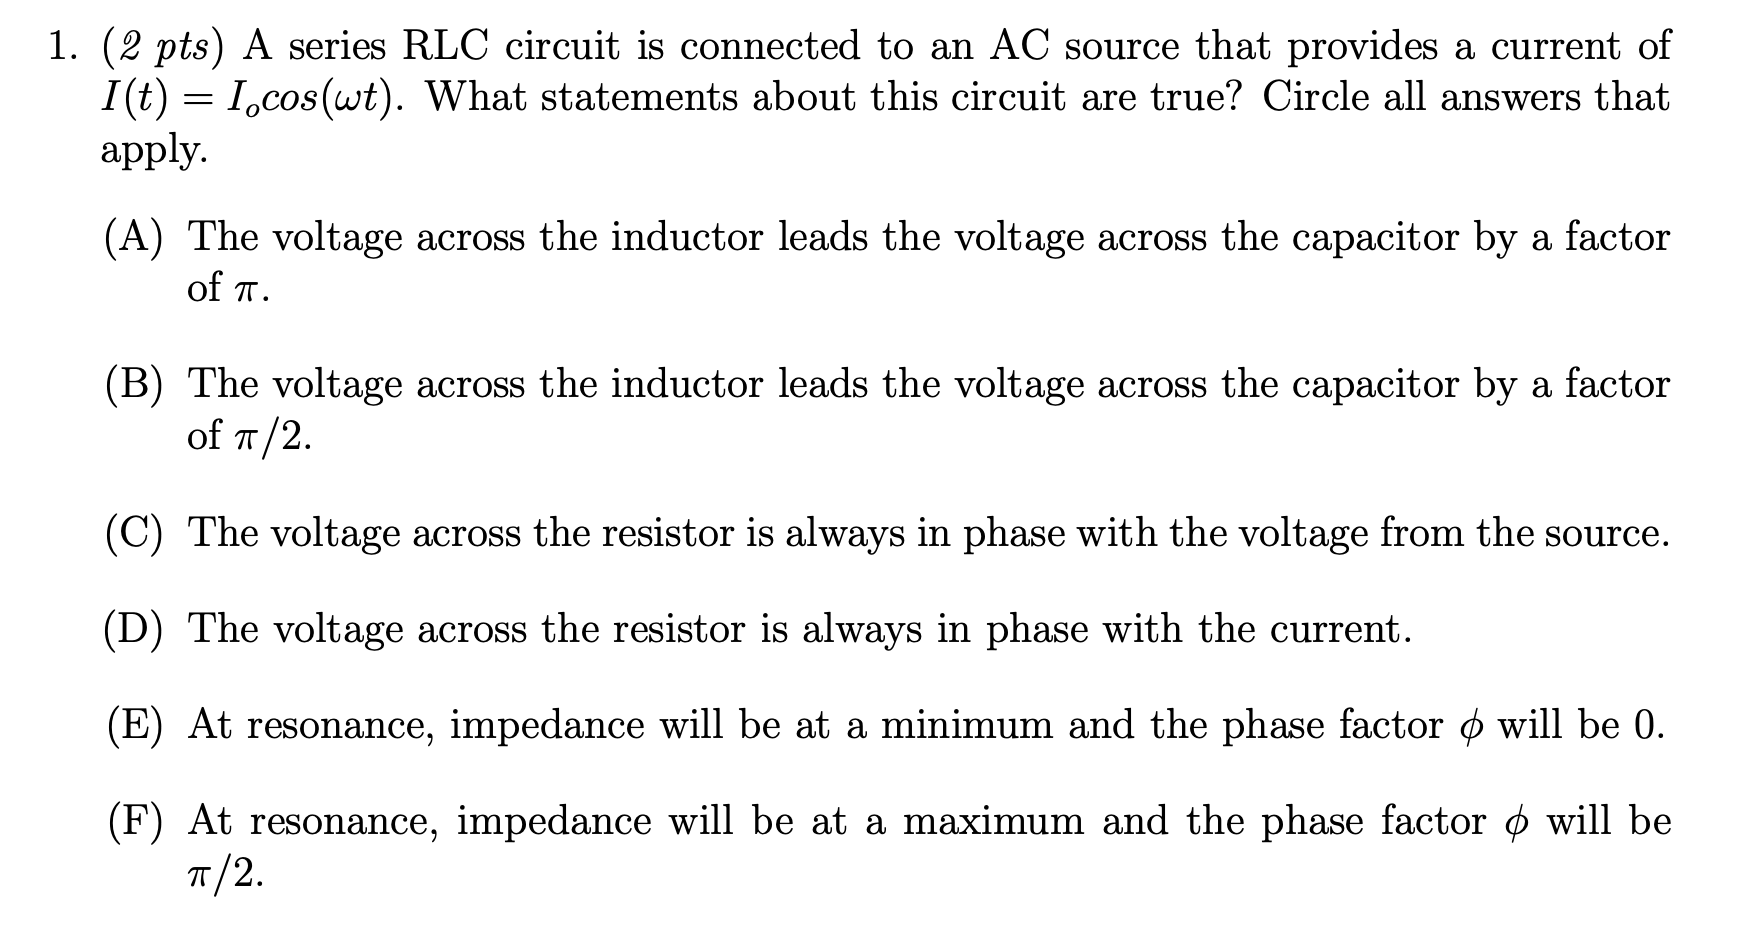 1. (2 pts) A series RLC circuit is connected to an AC source that provides a current of
I(t) = I,cos(wt). What statements about this circuit are true? Circle all answers that
apply.
(A) The voltage across the inductor leads the voltage across the capacitor by a factor
of T.
(B) The voltage across the inductor leads the voltage across the capacitor by a factor
of T/2.
(C) The voltage across the resistor is always in phase with the voltage from the source.
(D) The voltage across the resistor is always in phase with the current.
(E) At resonance, impedance will be at a minimum and the phase factor o will be 0.
(F) At resonance, impedance will be at a maximum and the phase factor o will be
T/2.
